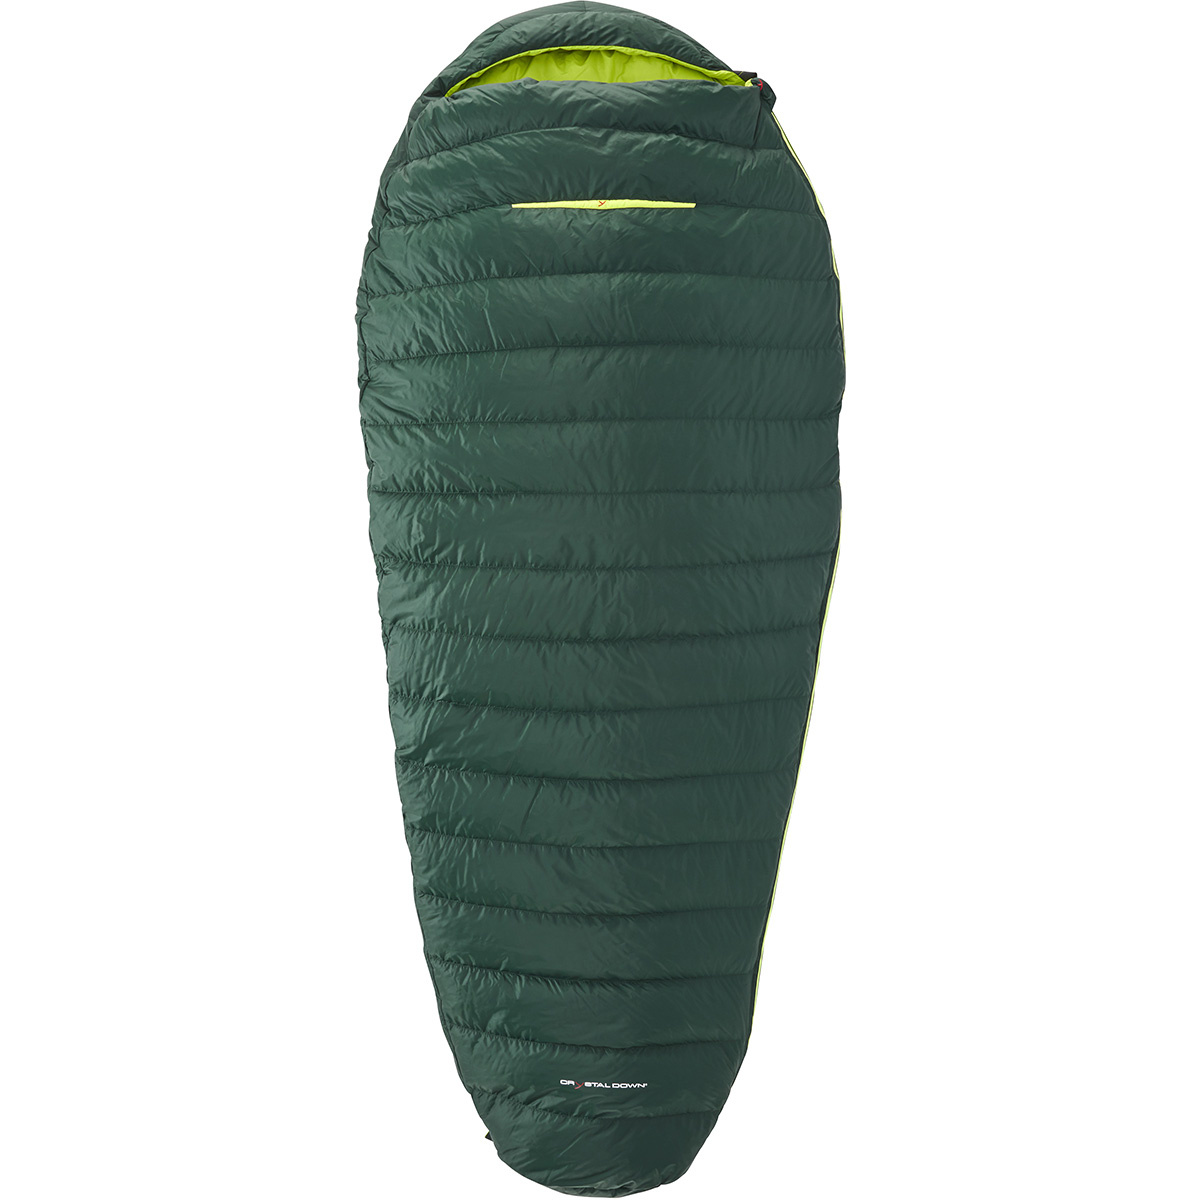 Image of Nordisk Sacco a pelo Tension Comfort 300